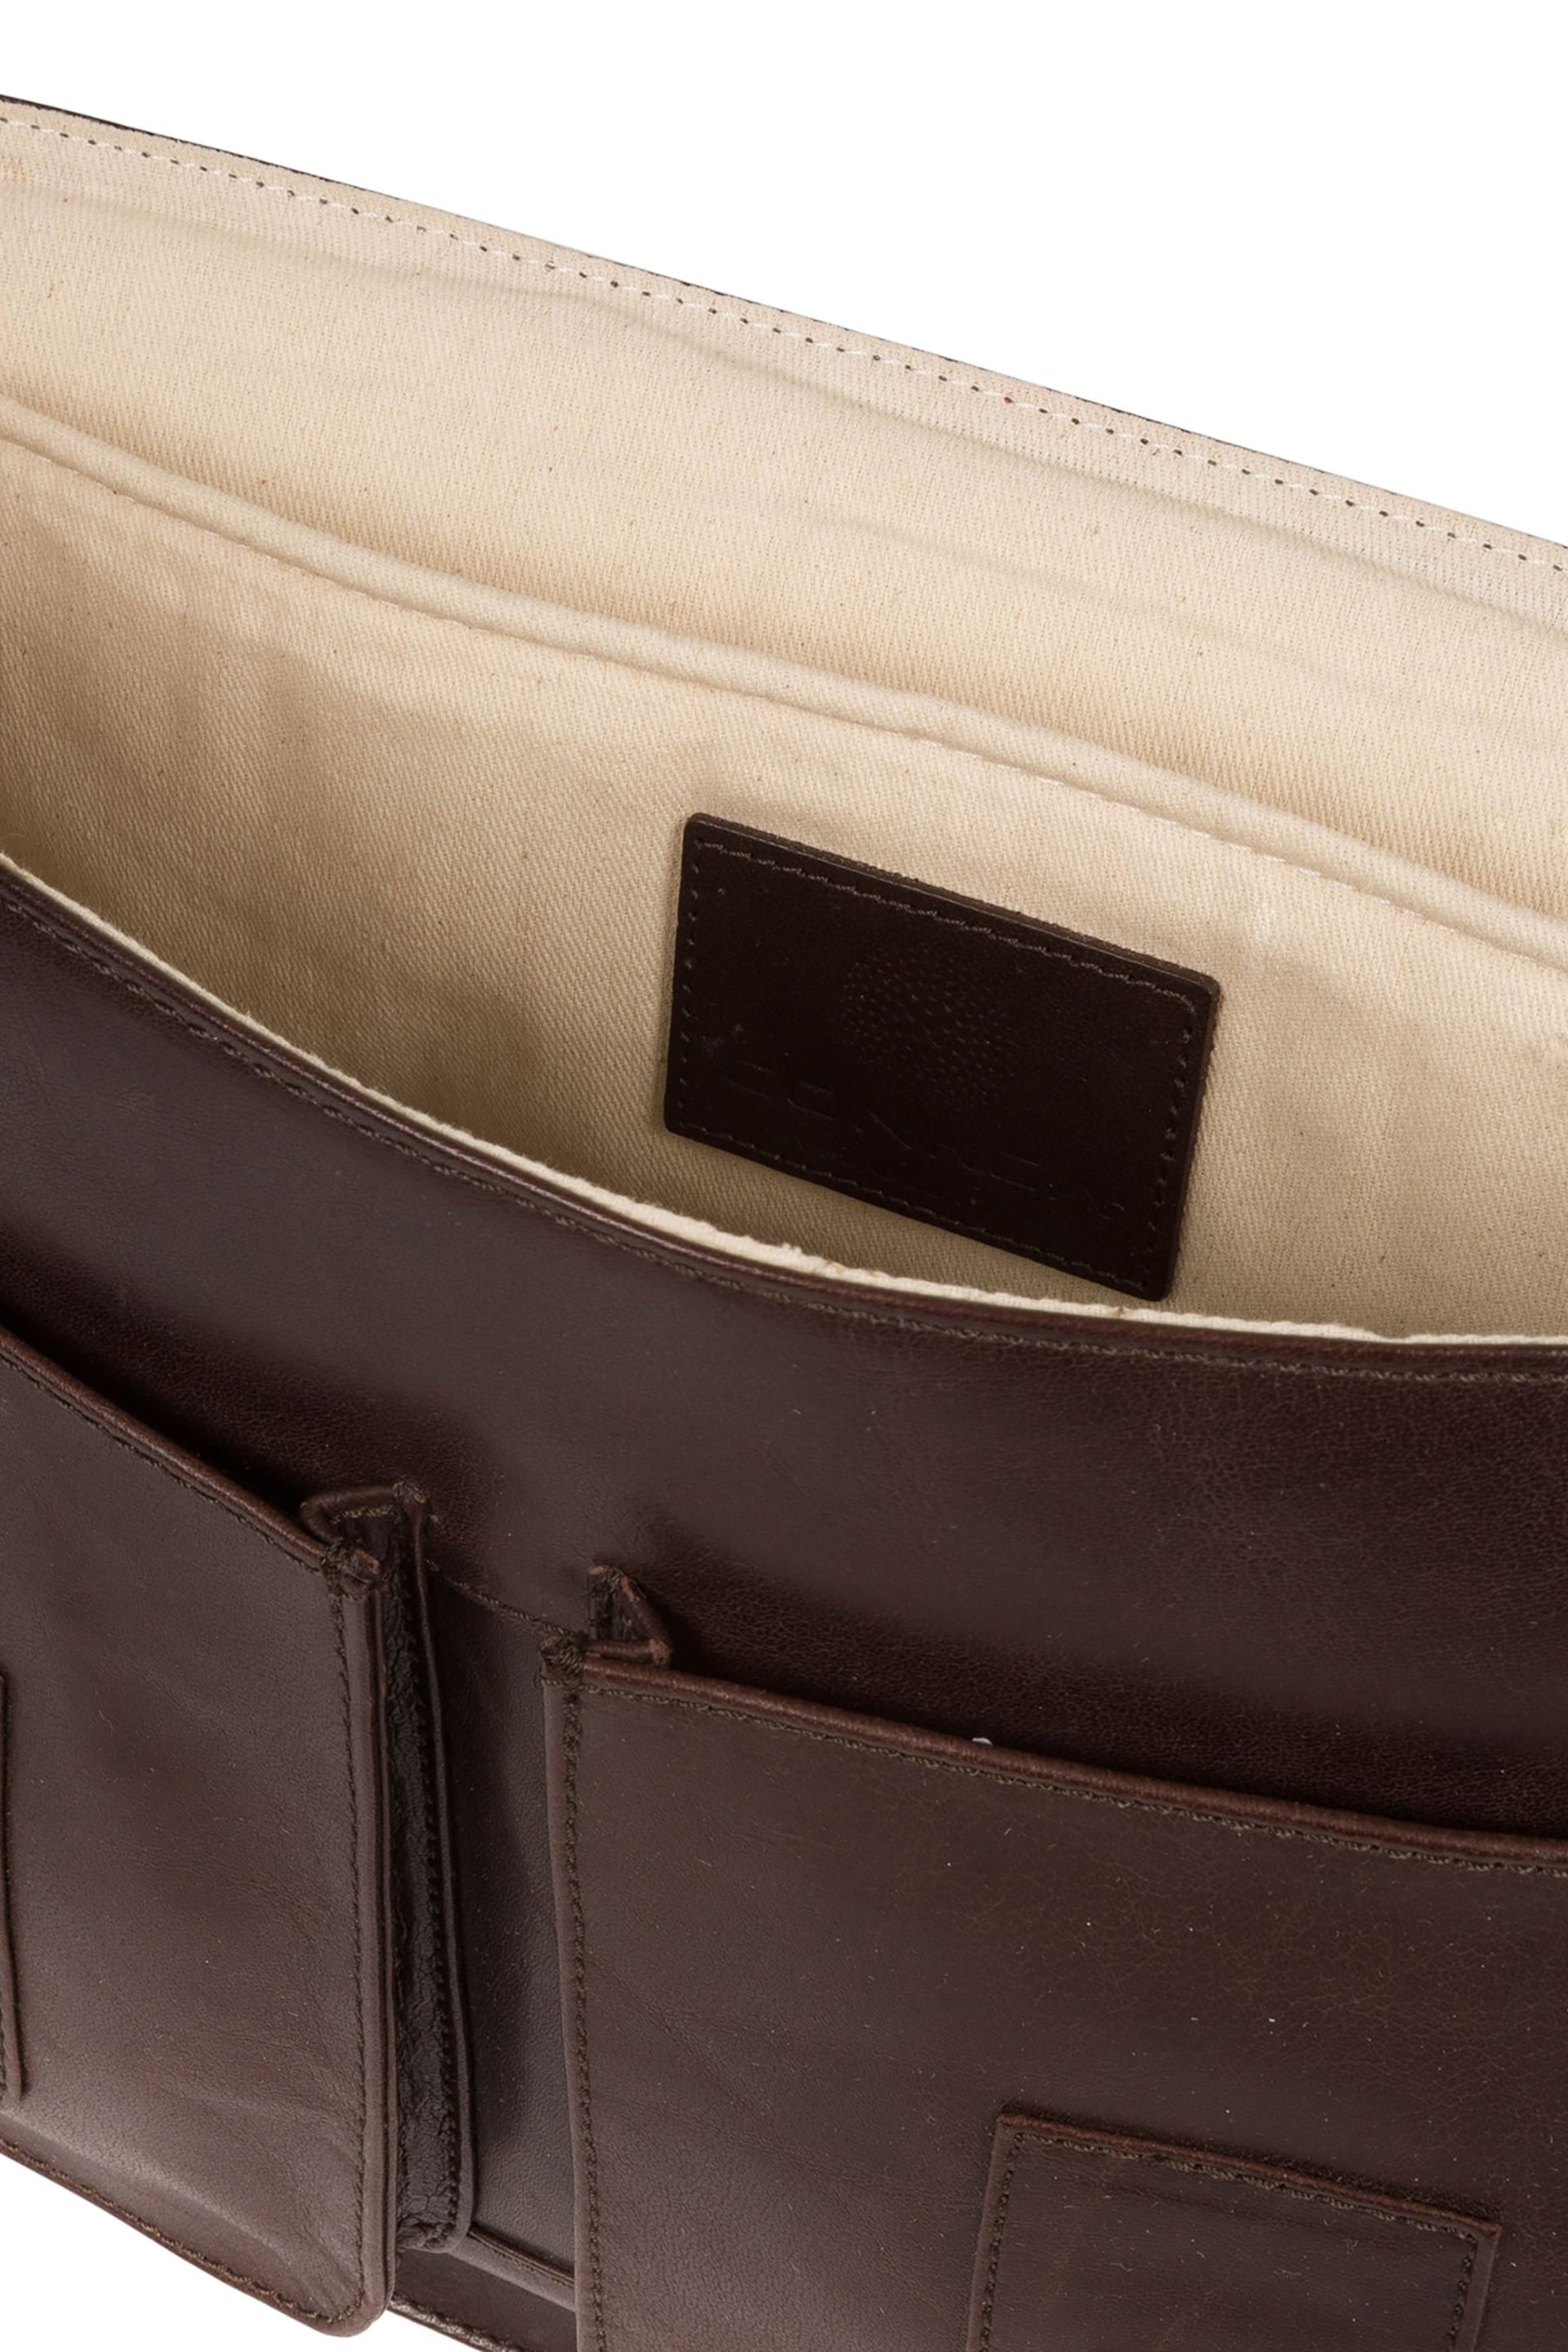 Conkca Pinter Leather Work Bag - Image 6 of 8